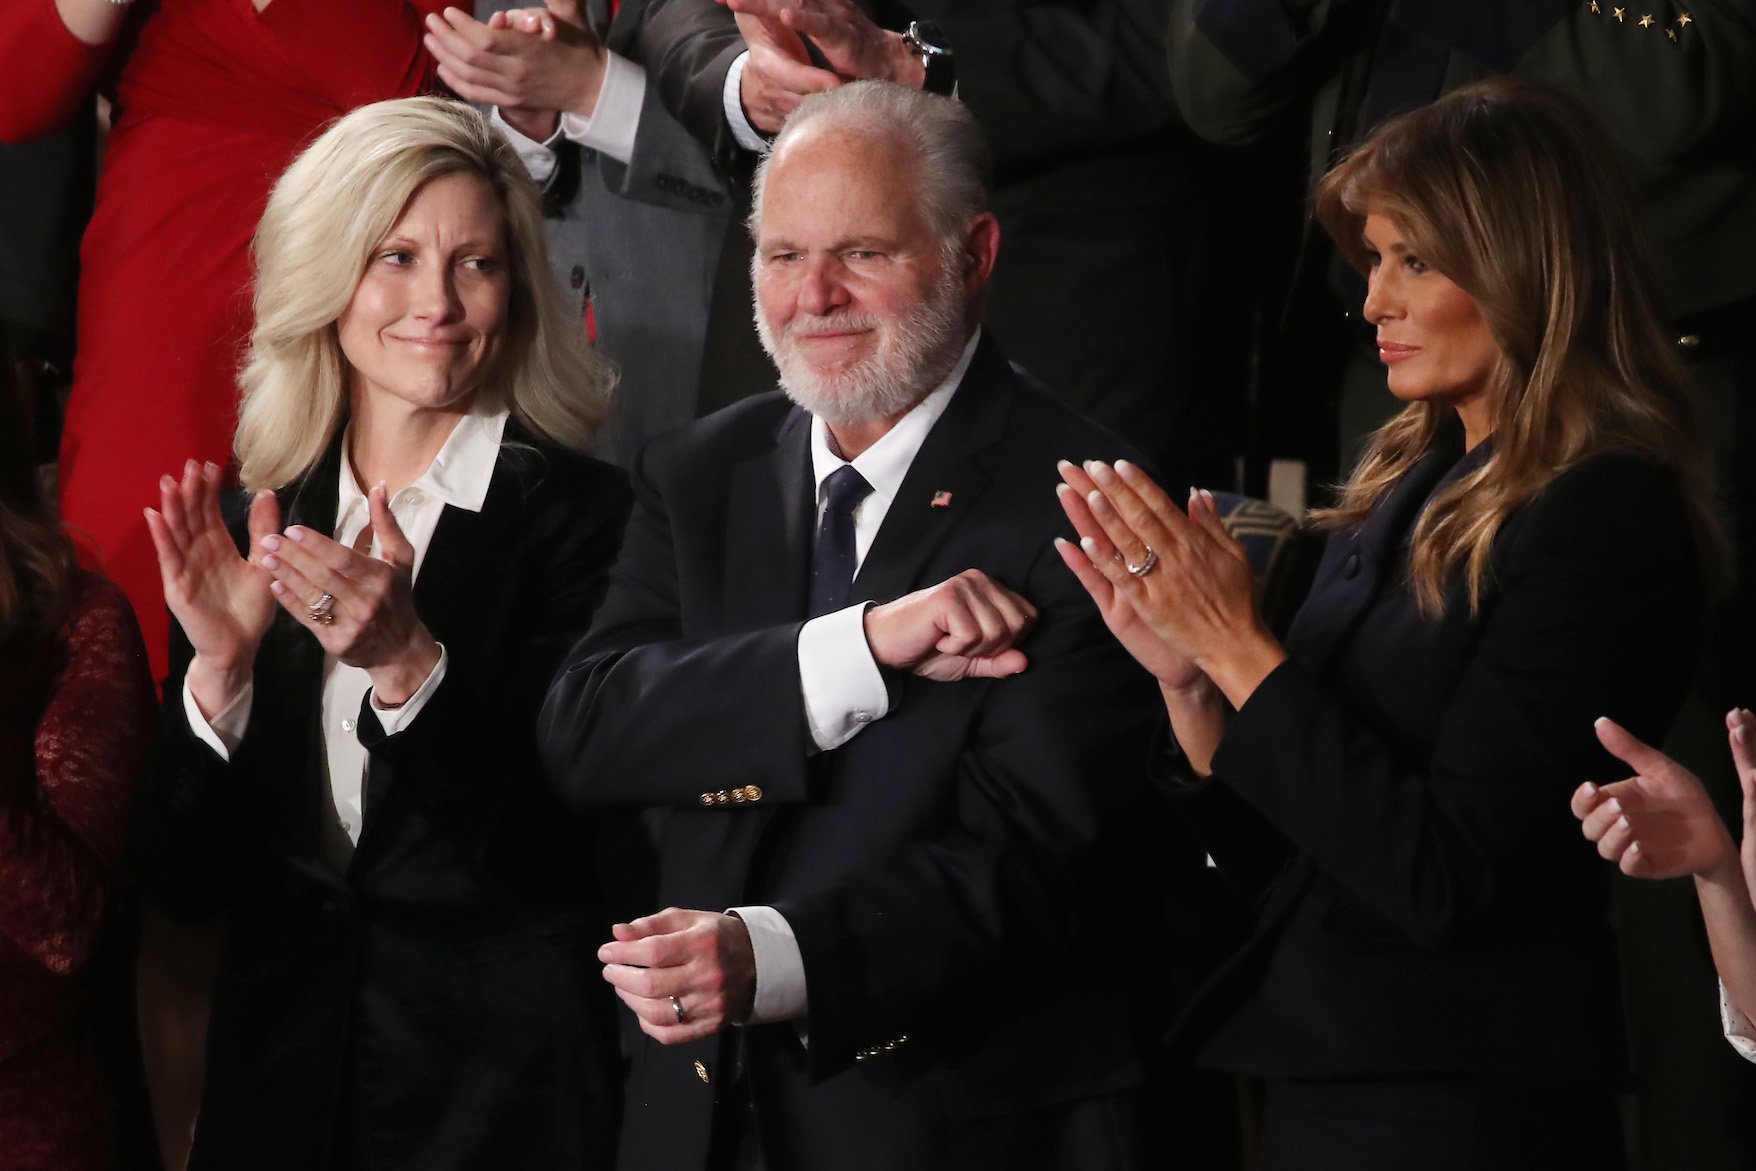 Rush Limbaugh and wife Kathryn Adams Limbaugh attend the State of the Union address